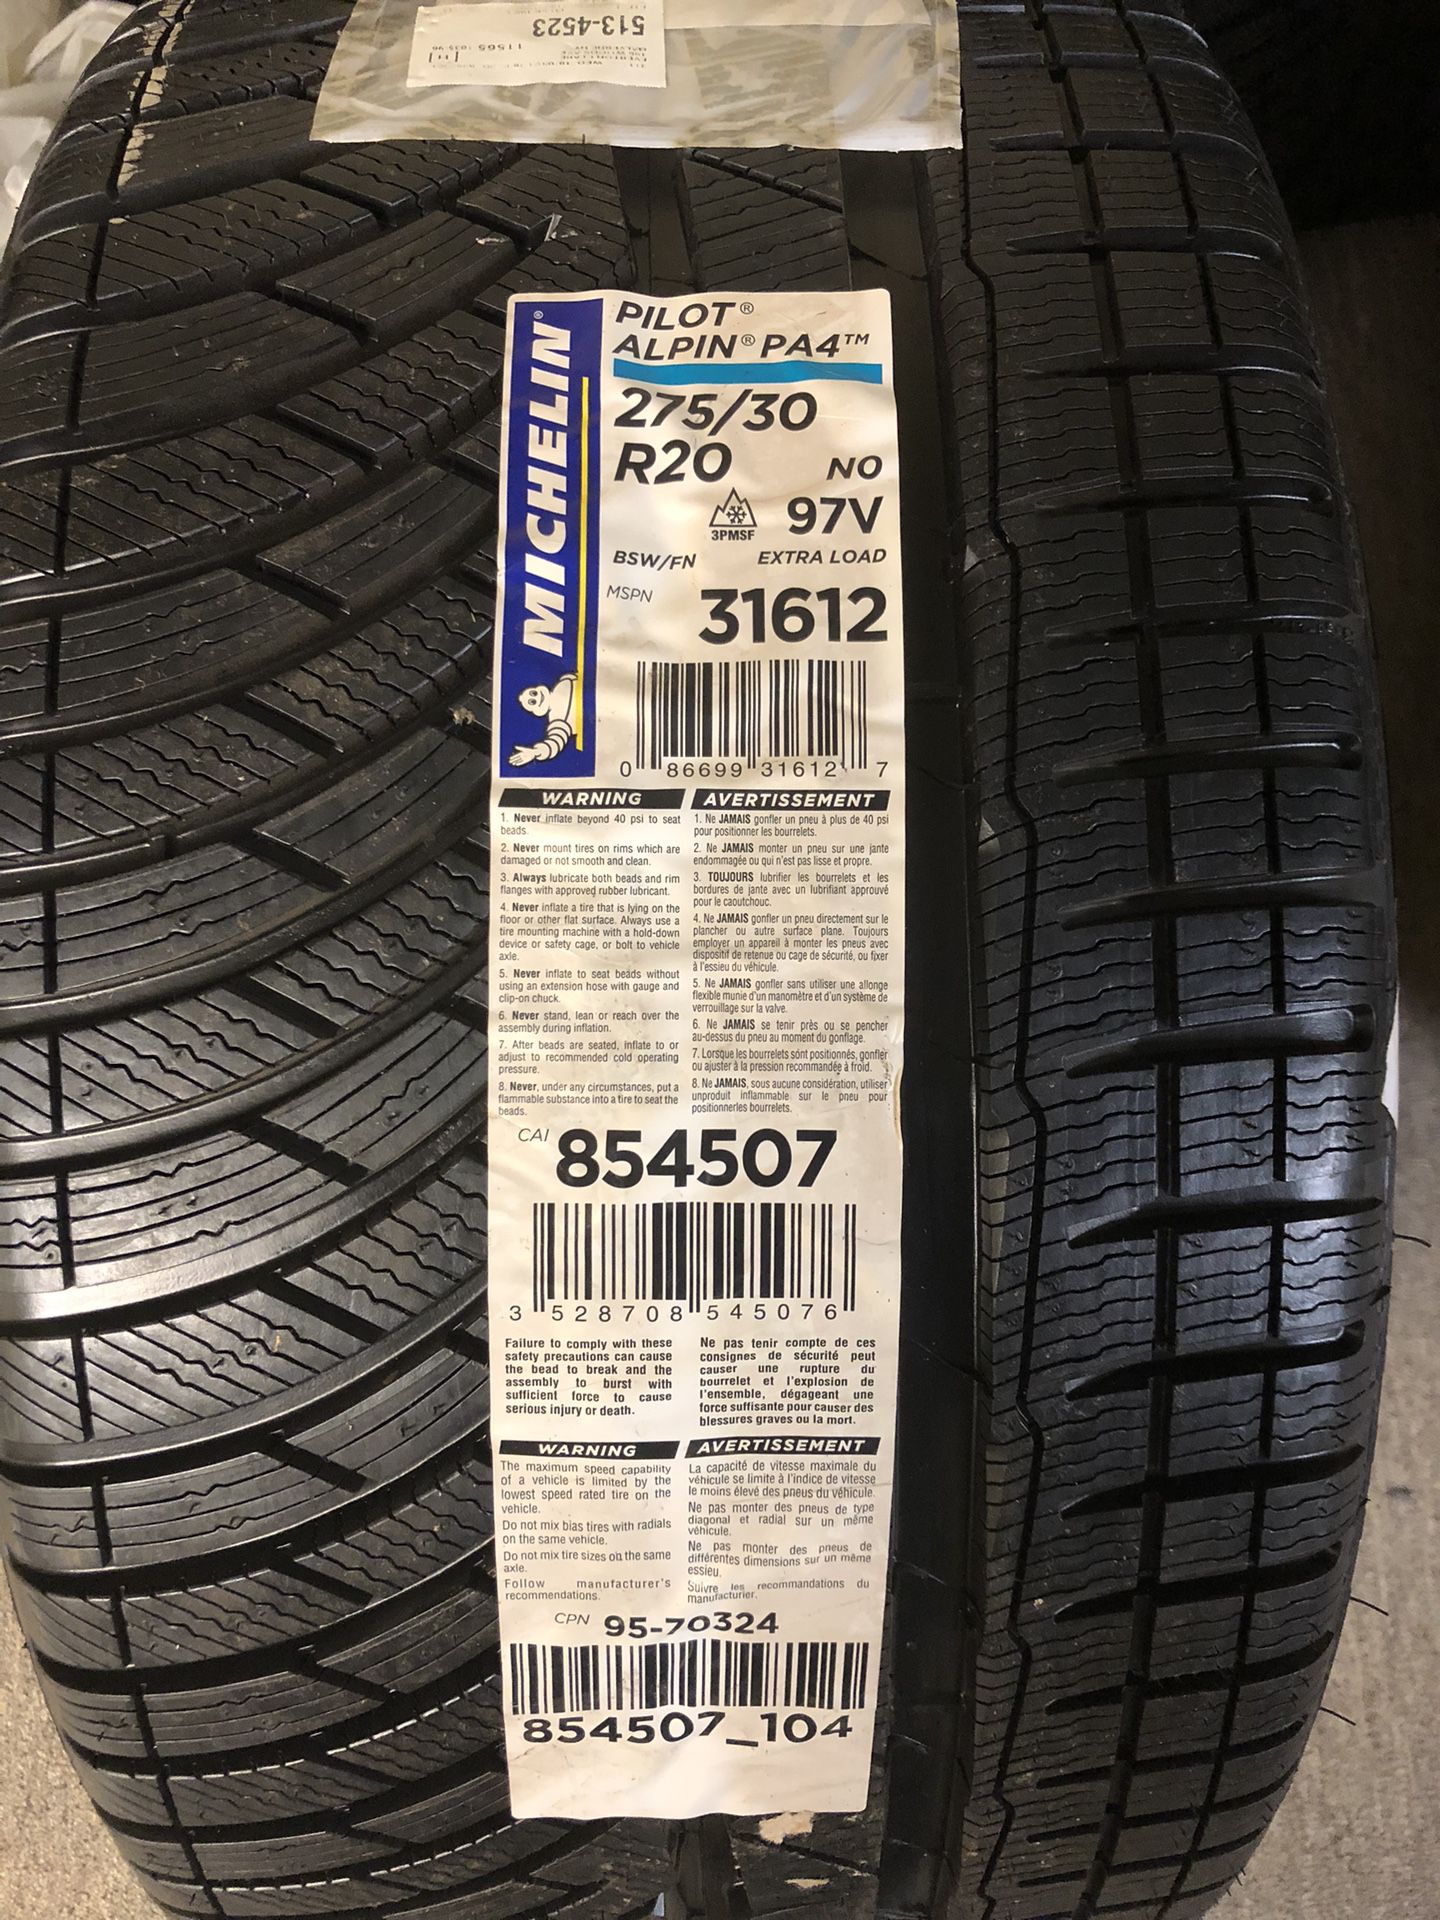 Michelin Pilot Alpin PA4 Tires 31612 275/30R20 for Sale in Queens, NY -  OfferUp